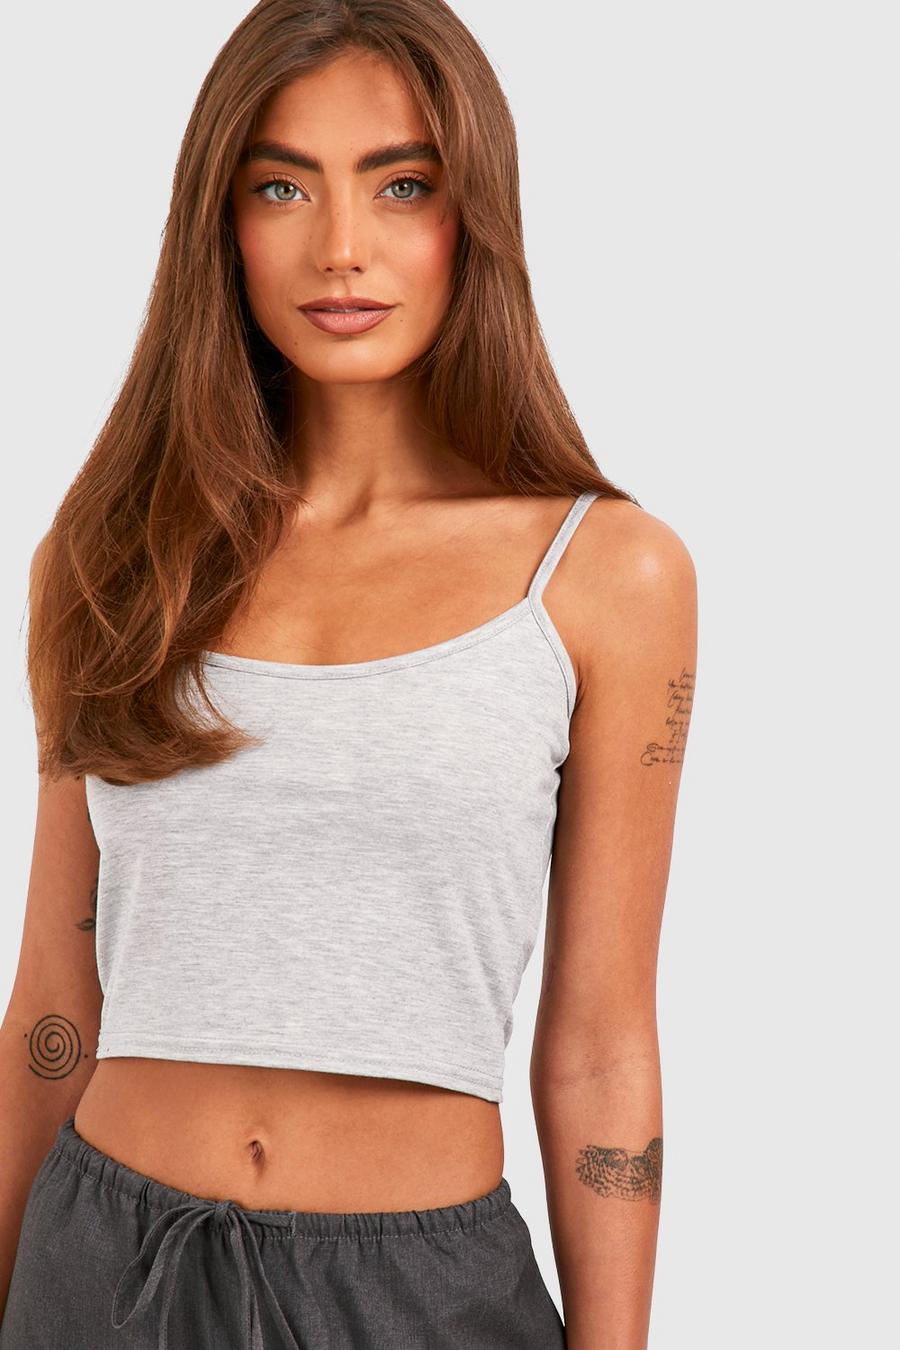 Grey Jersey Knit Strappy Jean Grazer Crop Top image number 1